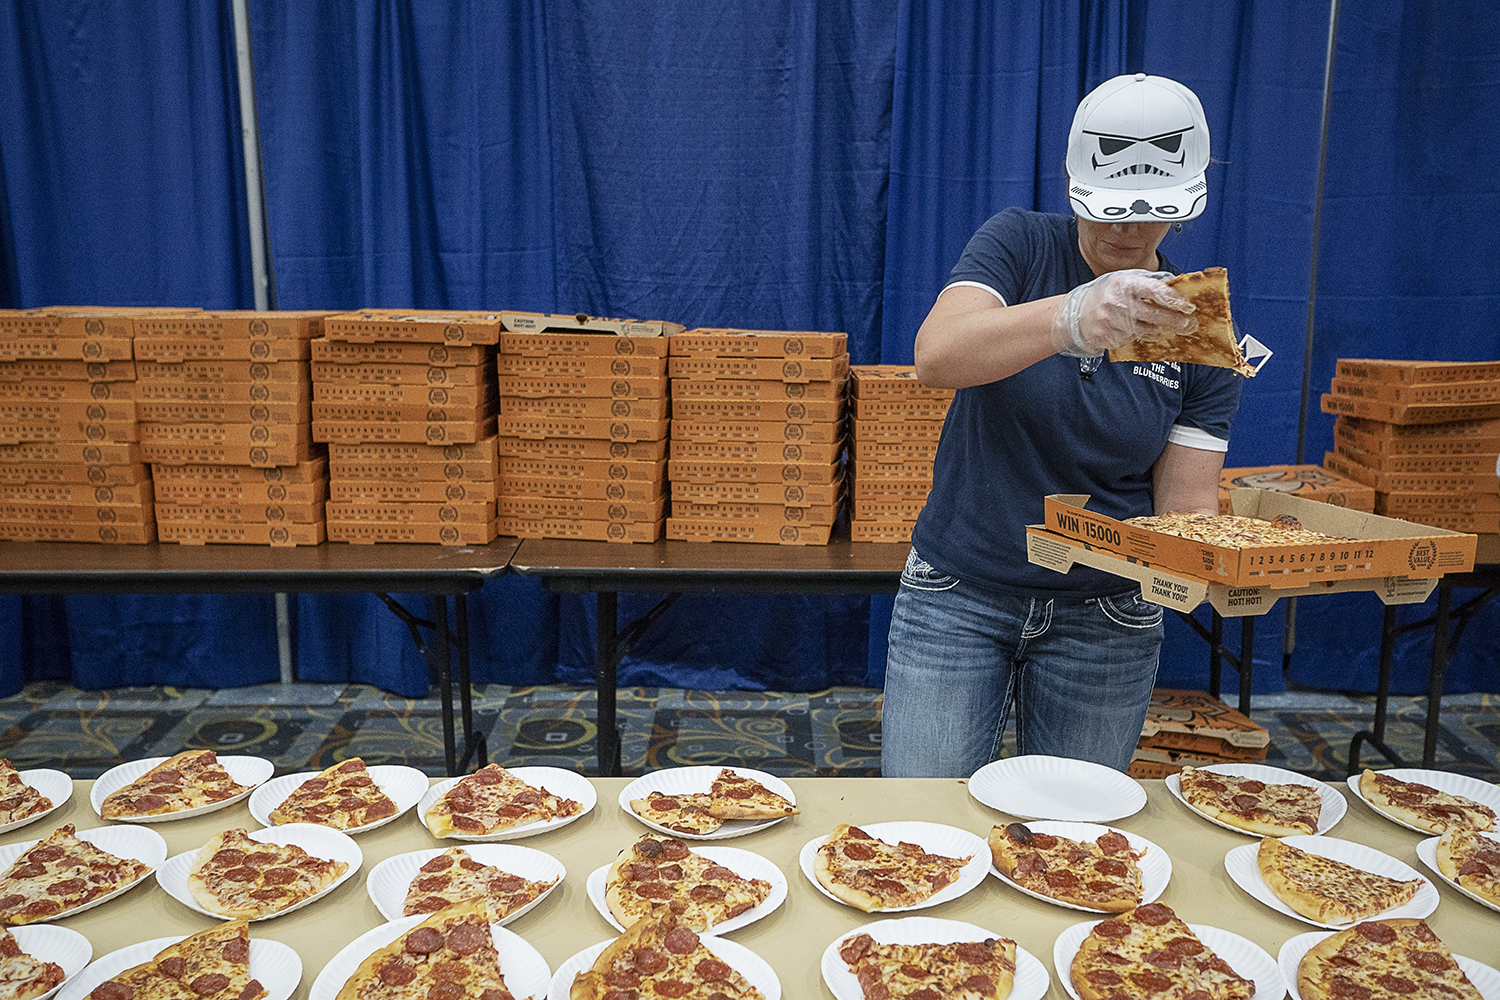 Flint, MI - Friday, May 4, 2018: Swartz Creek resident Joy Nyman, 33, places slices of pizza on paper plates for incoming Blueberry Ambassadors at the Riverfront Banquet Center for the 5th Annual Blueberry Ambassador Awards Party.